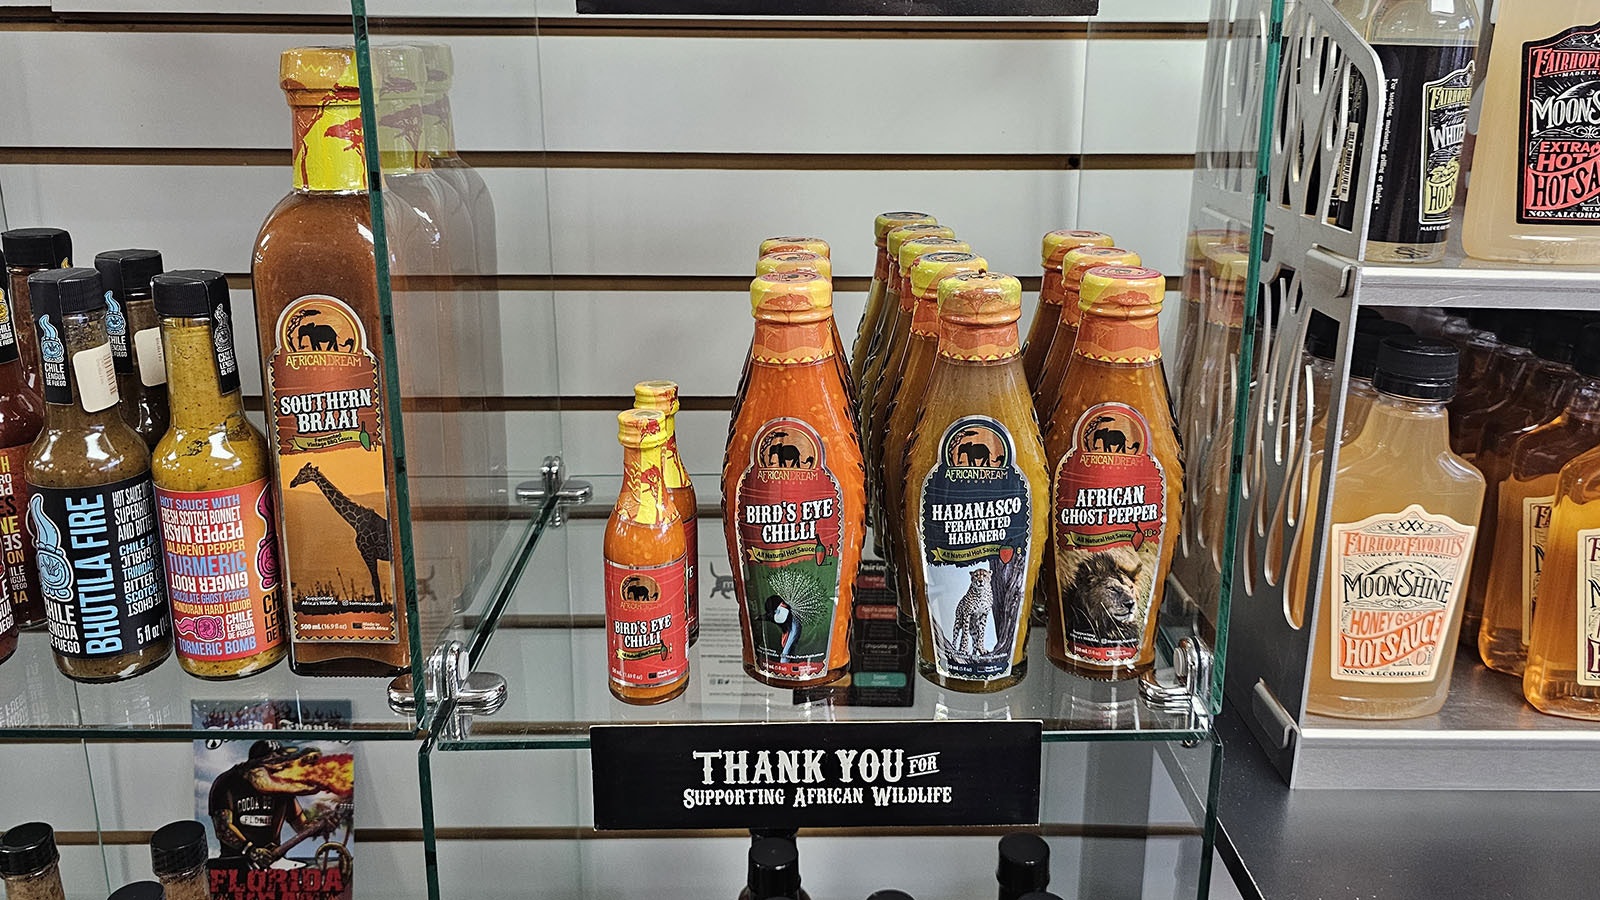 A full set of South African hot sauces are among hot sauces from around the globe on inventory at Discover Thermopolis in Thermopolis, Wyoming.